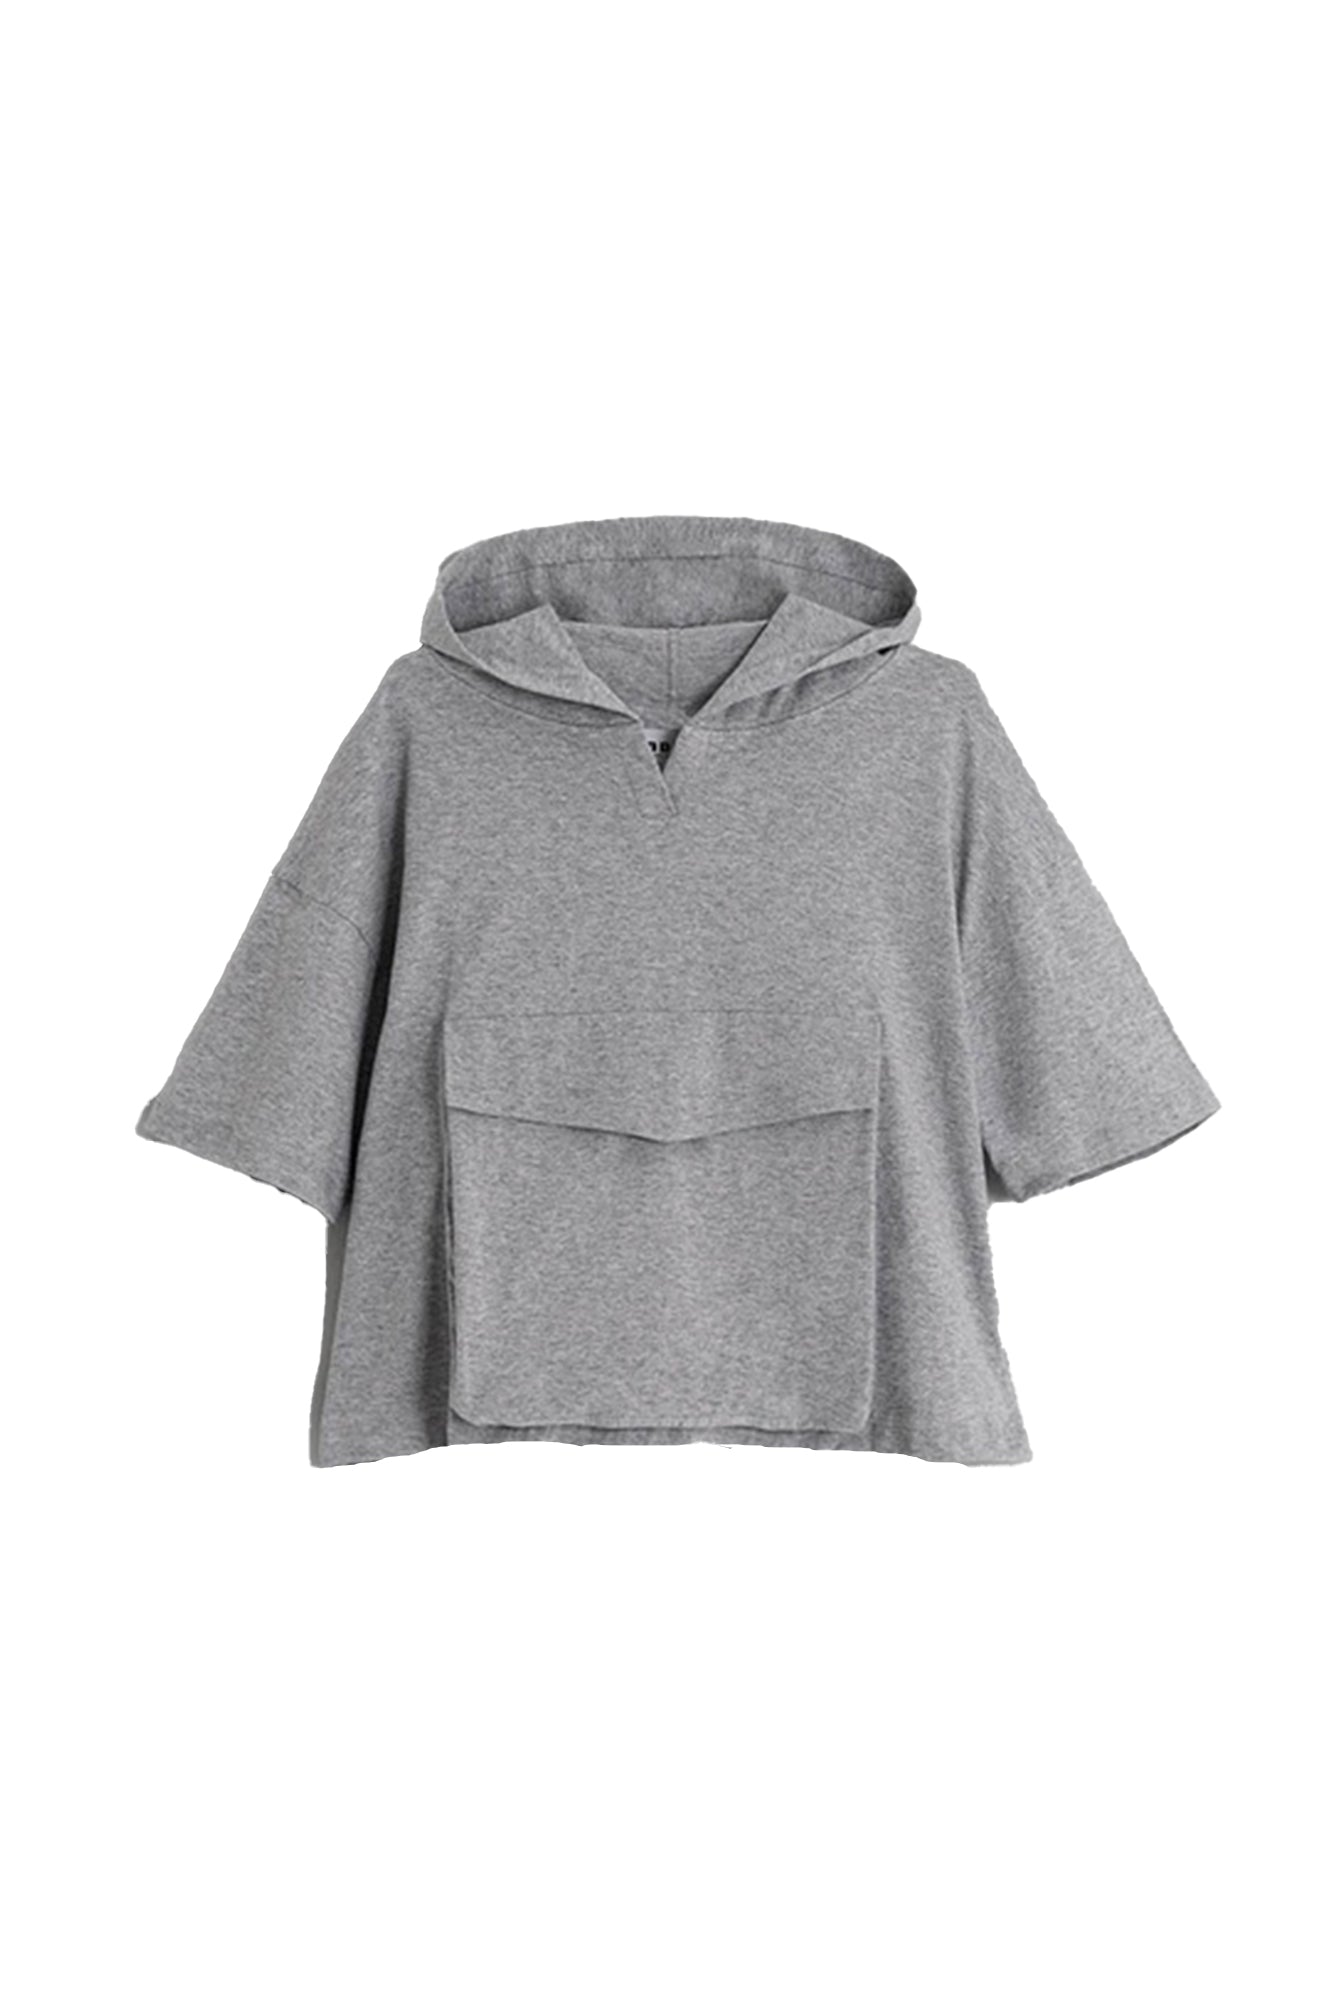 CAIA Hooded Top